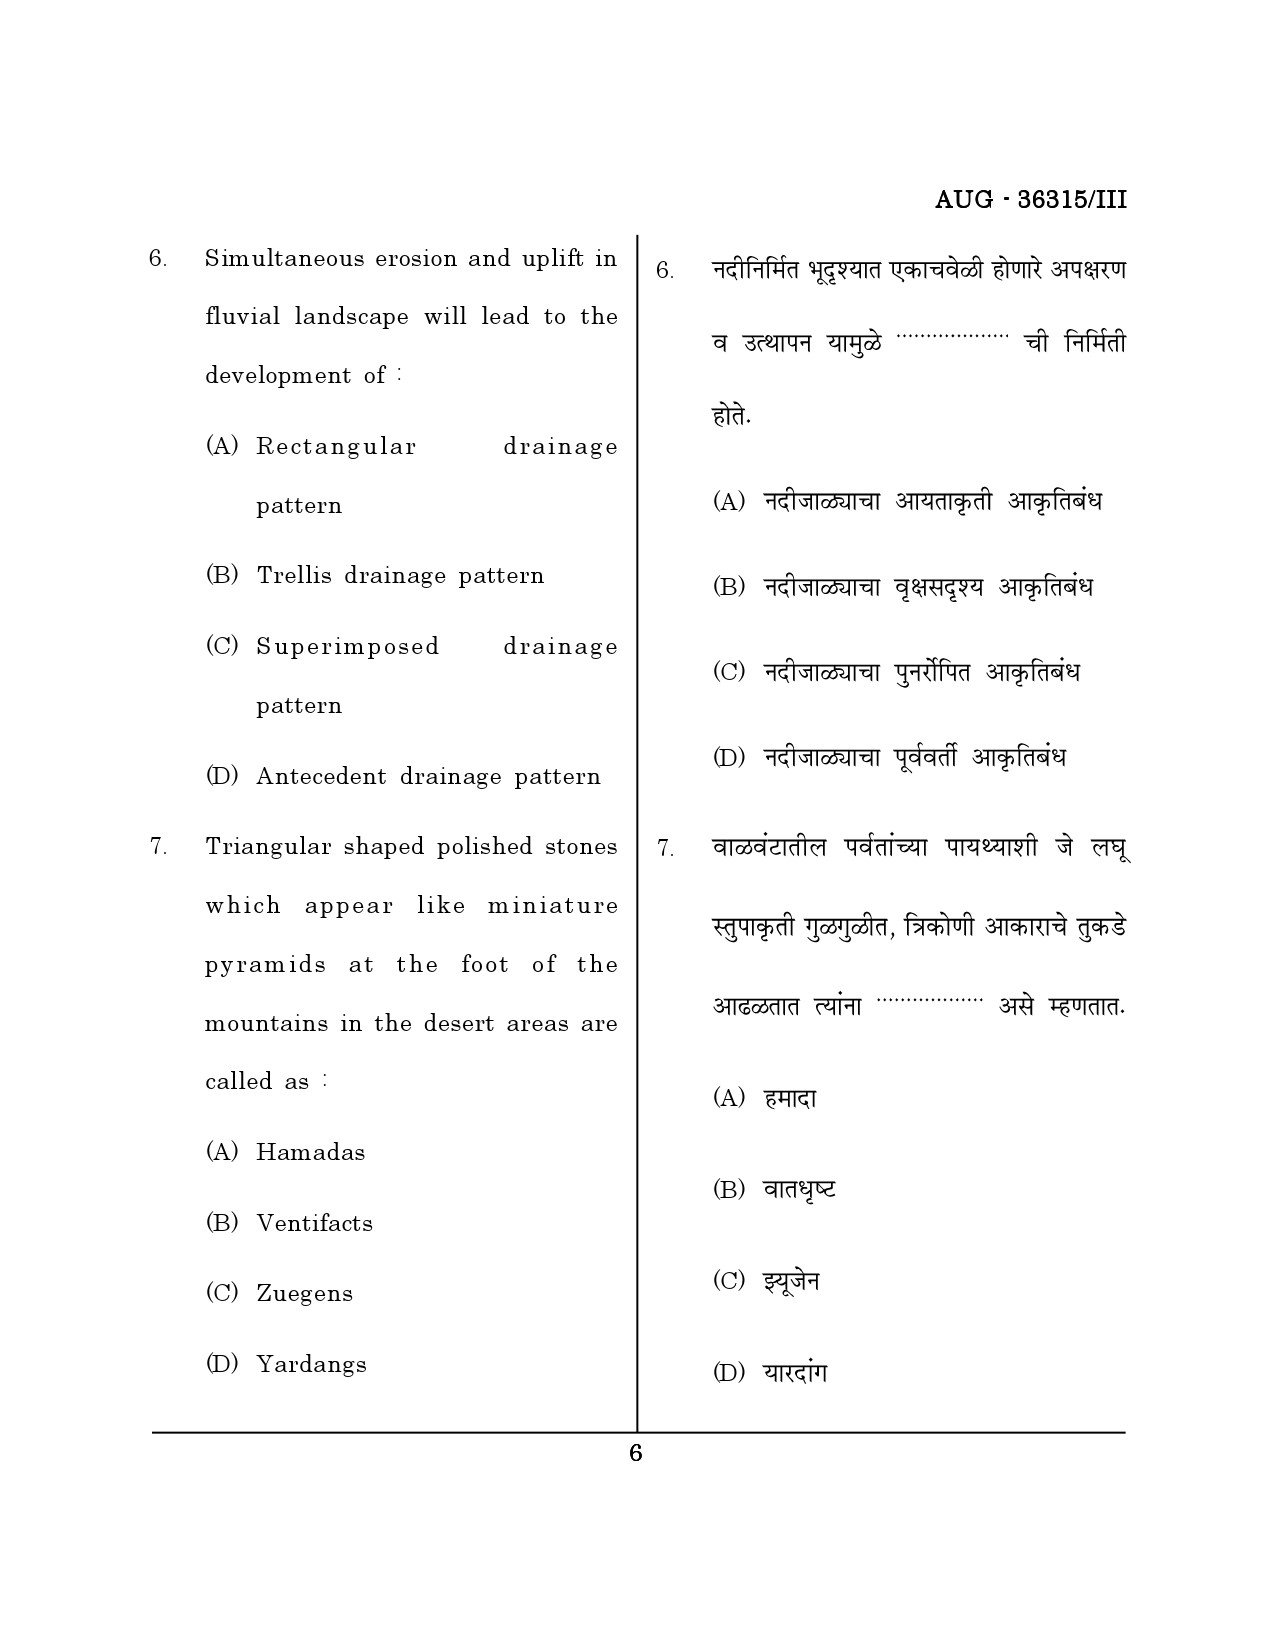 Maharashtra SET Geography Question Paper III August 2015 5